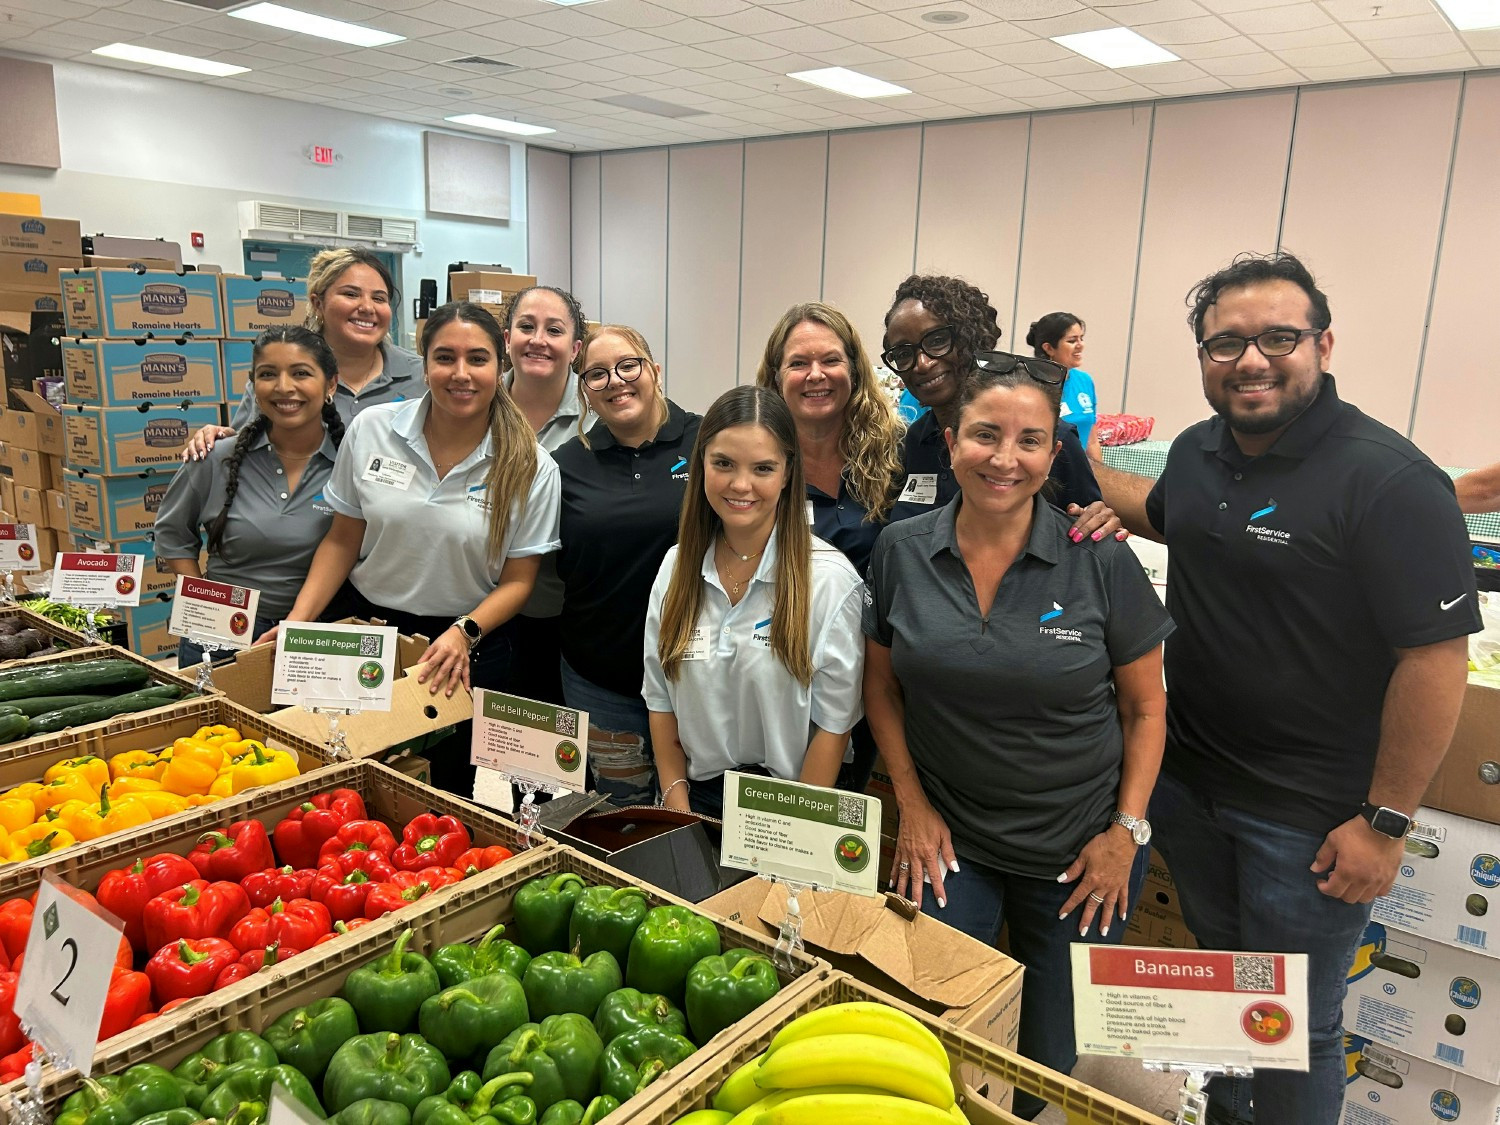 Social Responsibility: Our associates proudly embodied our values at this local school pantry initiative.